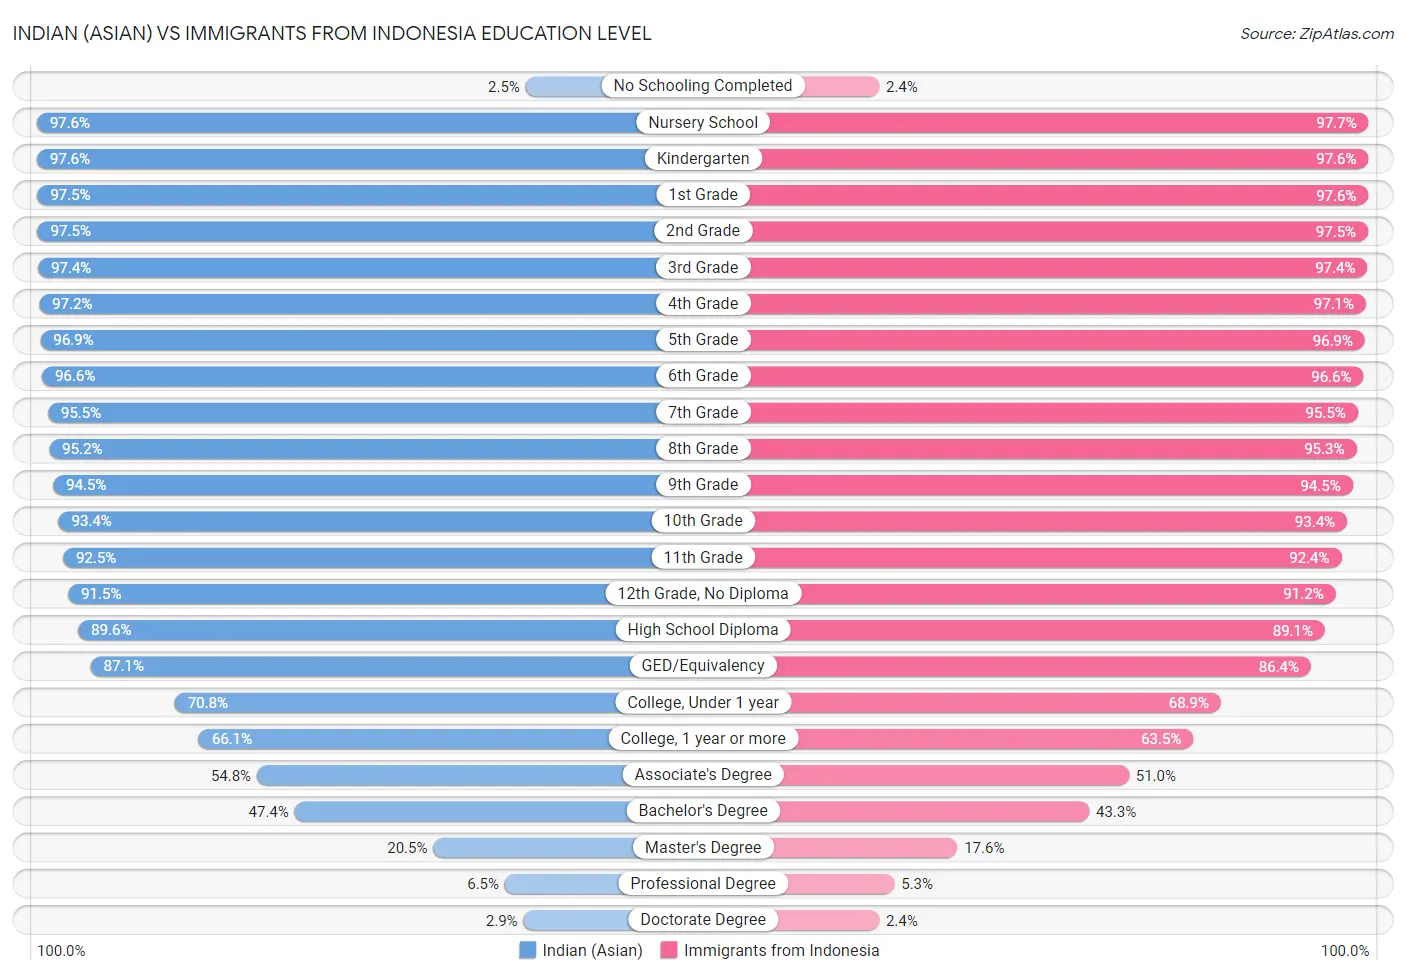 Indian (Asian) vs Immigrants from Indonesia Education Level